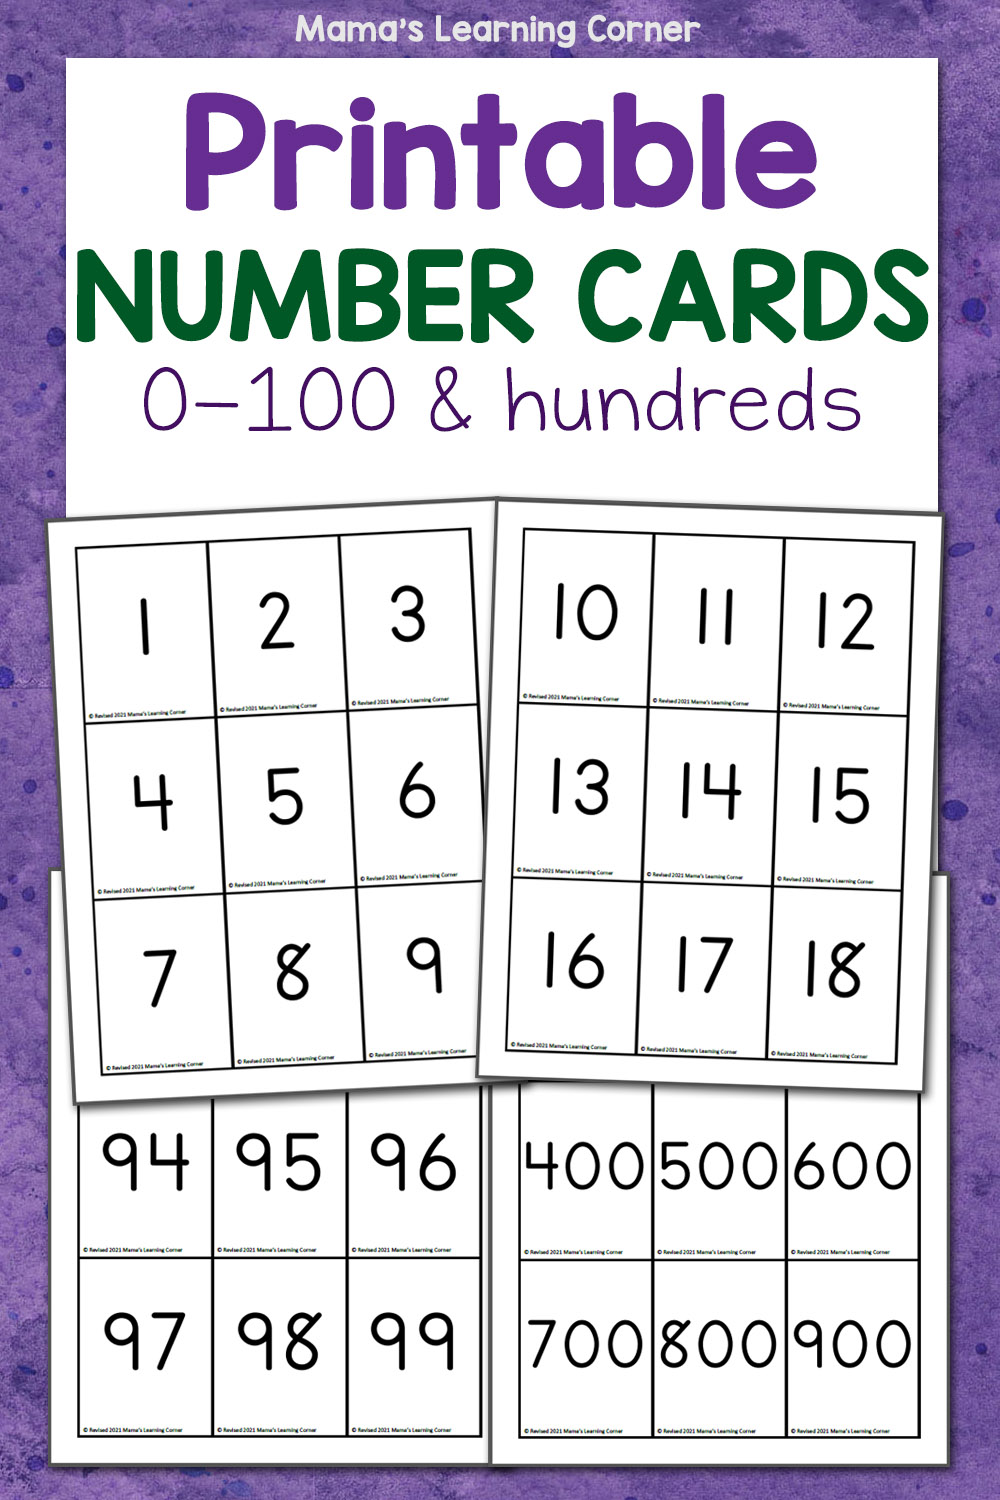 downloadable-free-printable-number-cards-1-100-printable-form